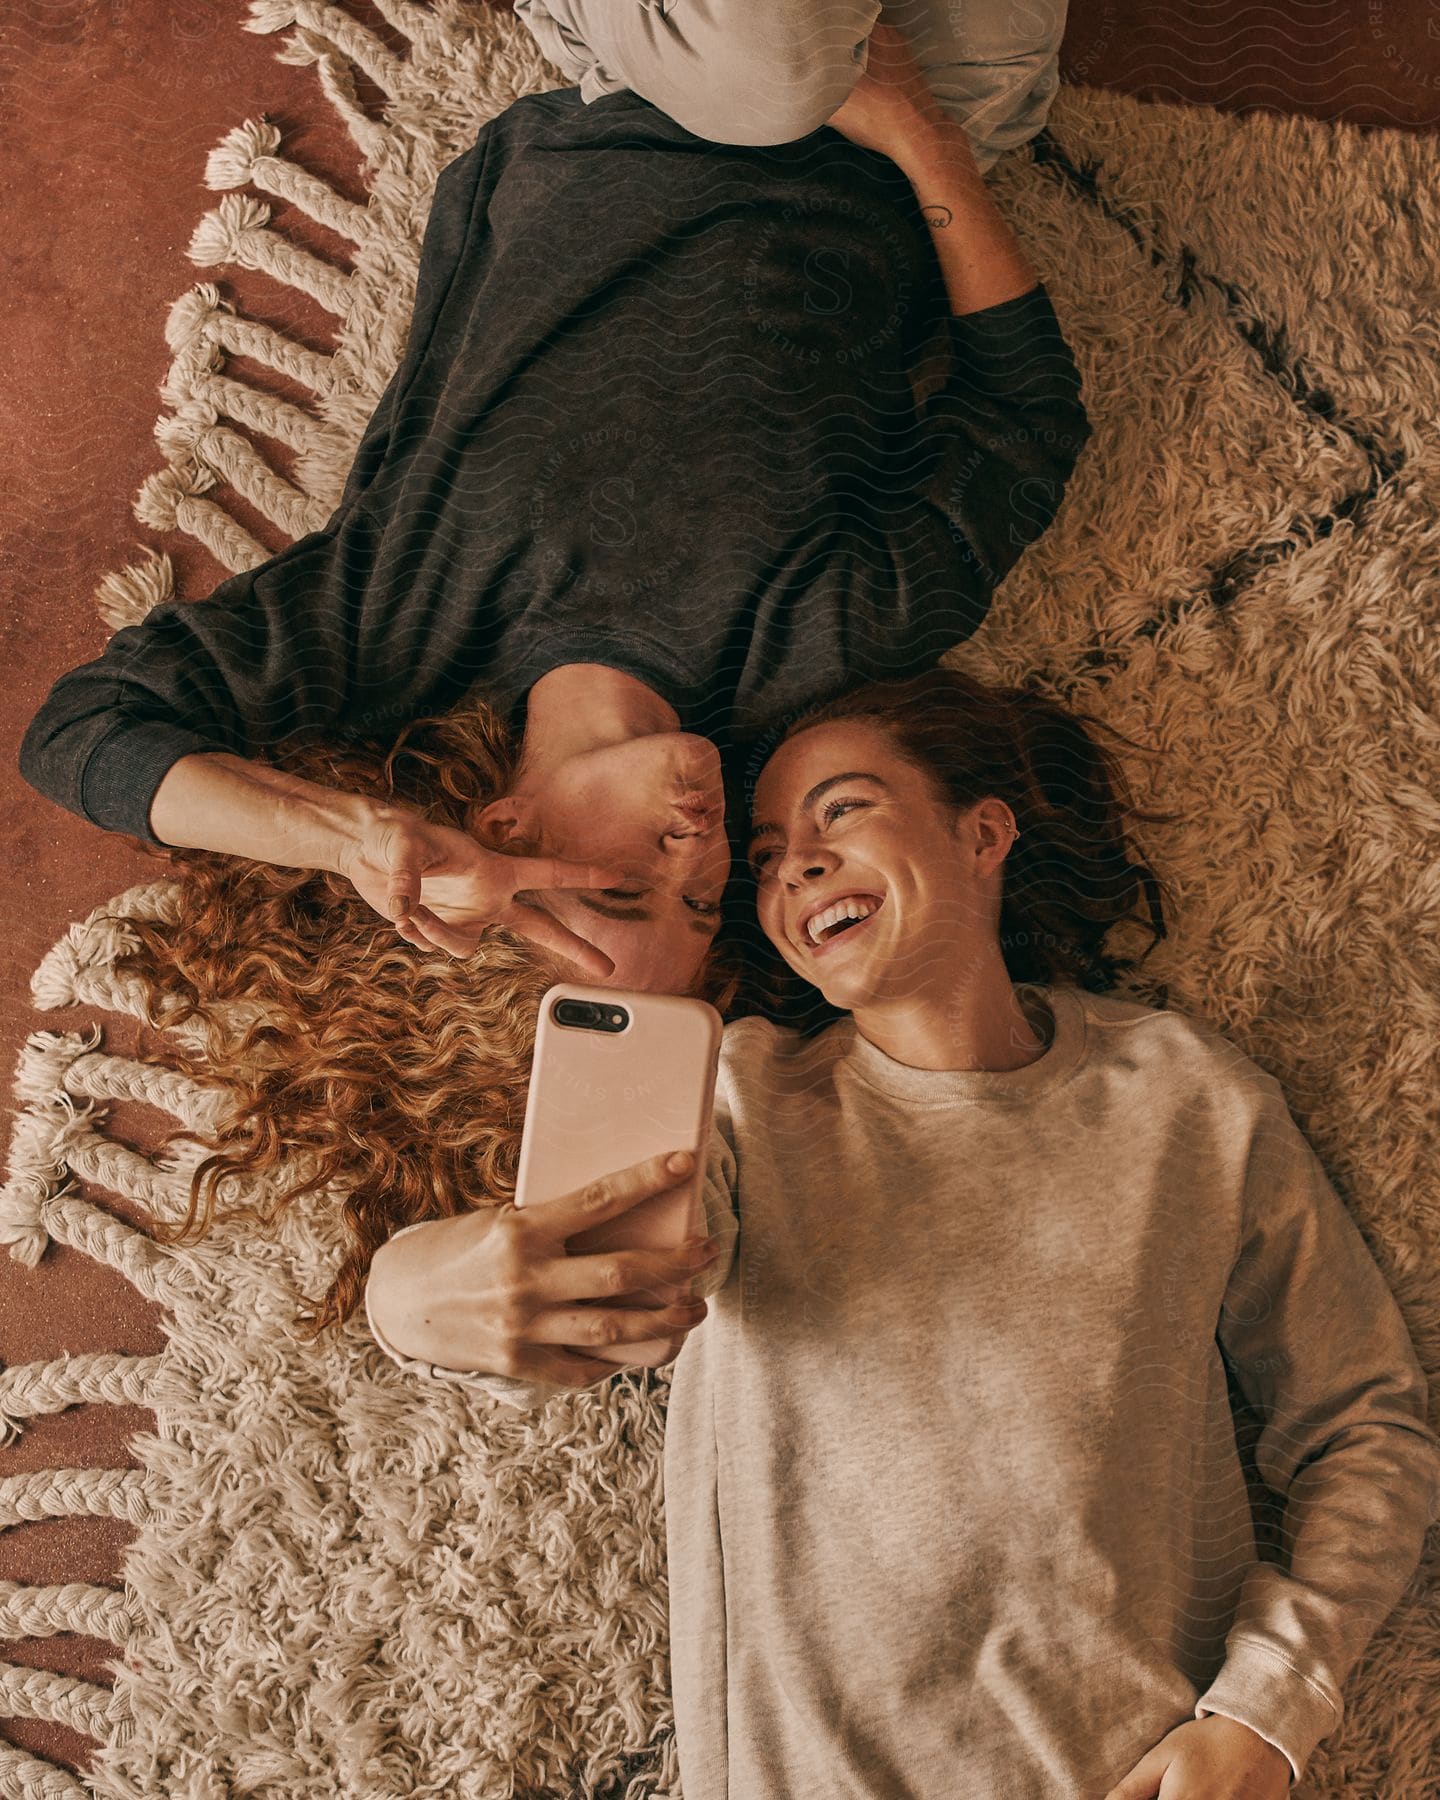 Women lying on a rug, laughing and taking a selfie